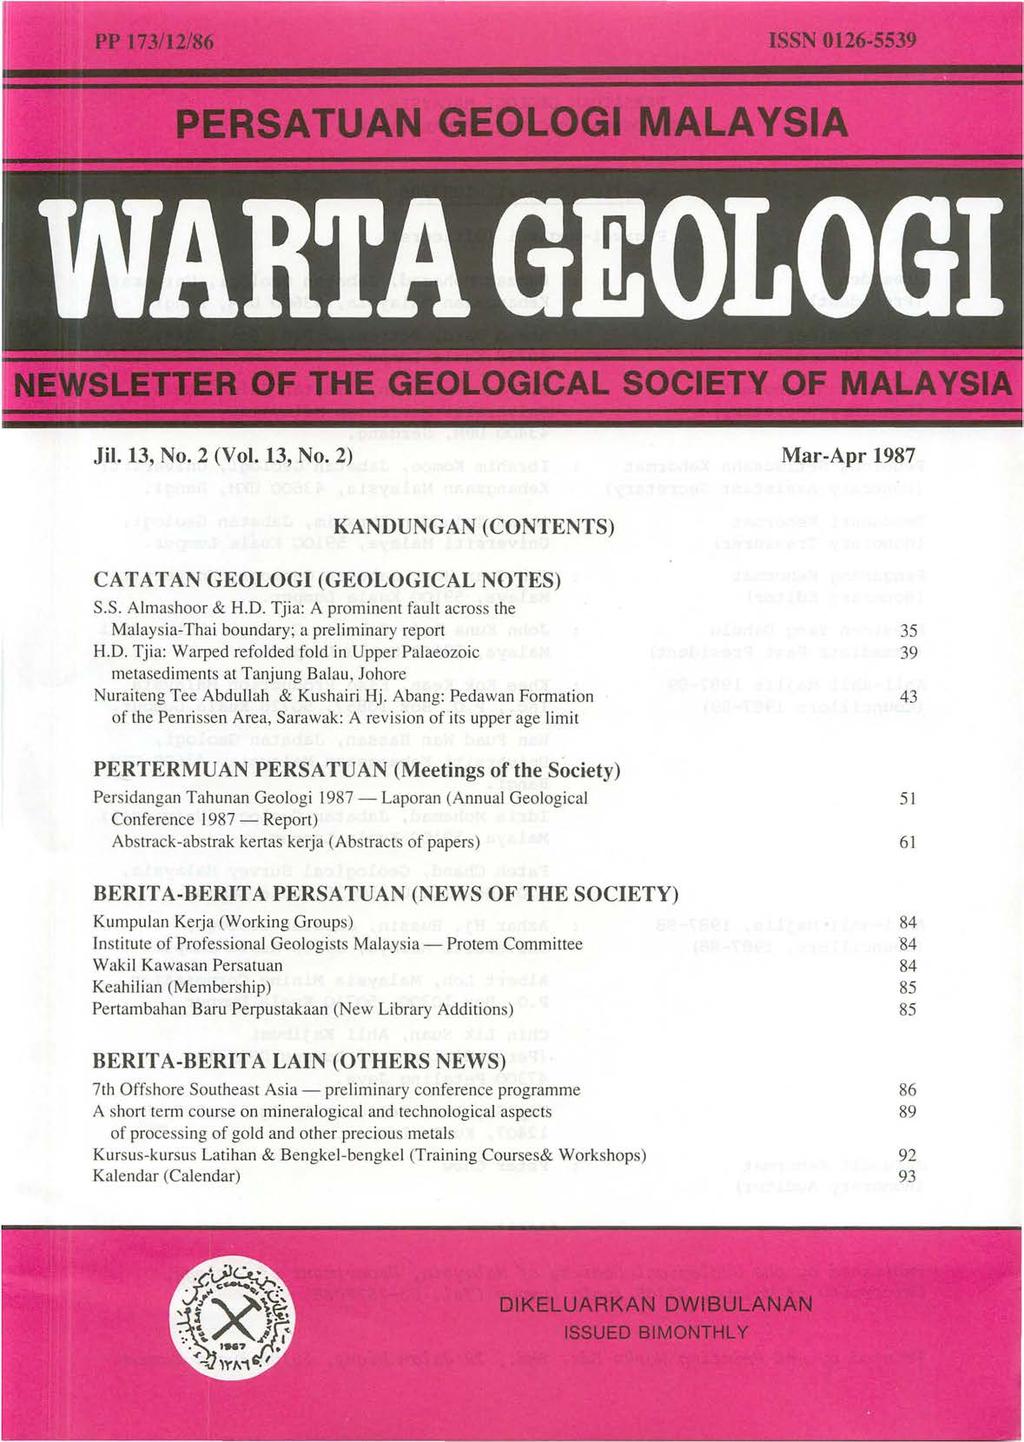 Jil. 13, No.2 (Vol. 13, No.2) Mar-Apr 1987 KANDUNGAN (CONTENTS) CAT AT AN GEOLOGI (GEOLOGICAL NOTES) S.S. Almashoor & H.D. Tjia: A prominent fault across the Malaysia-Thai boundary; a preliminary report H.